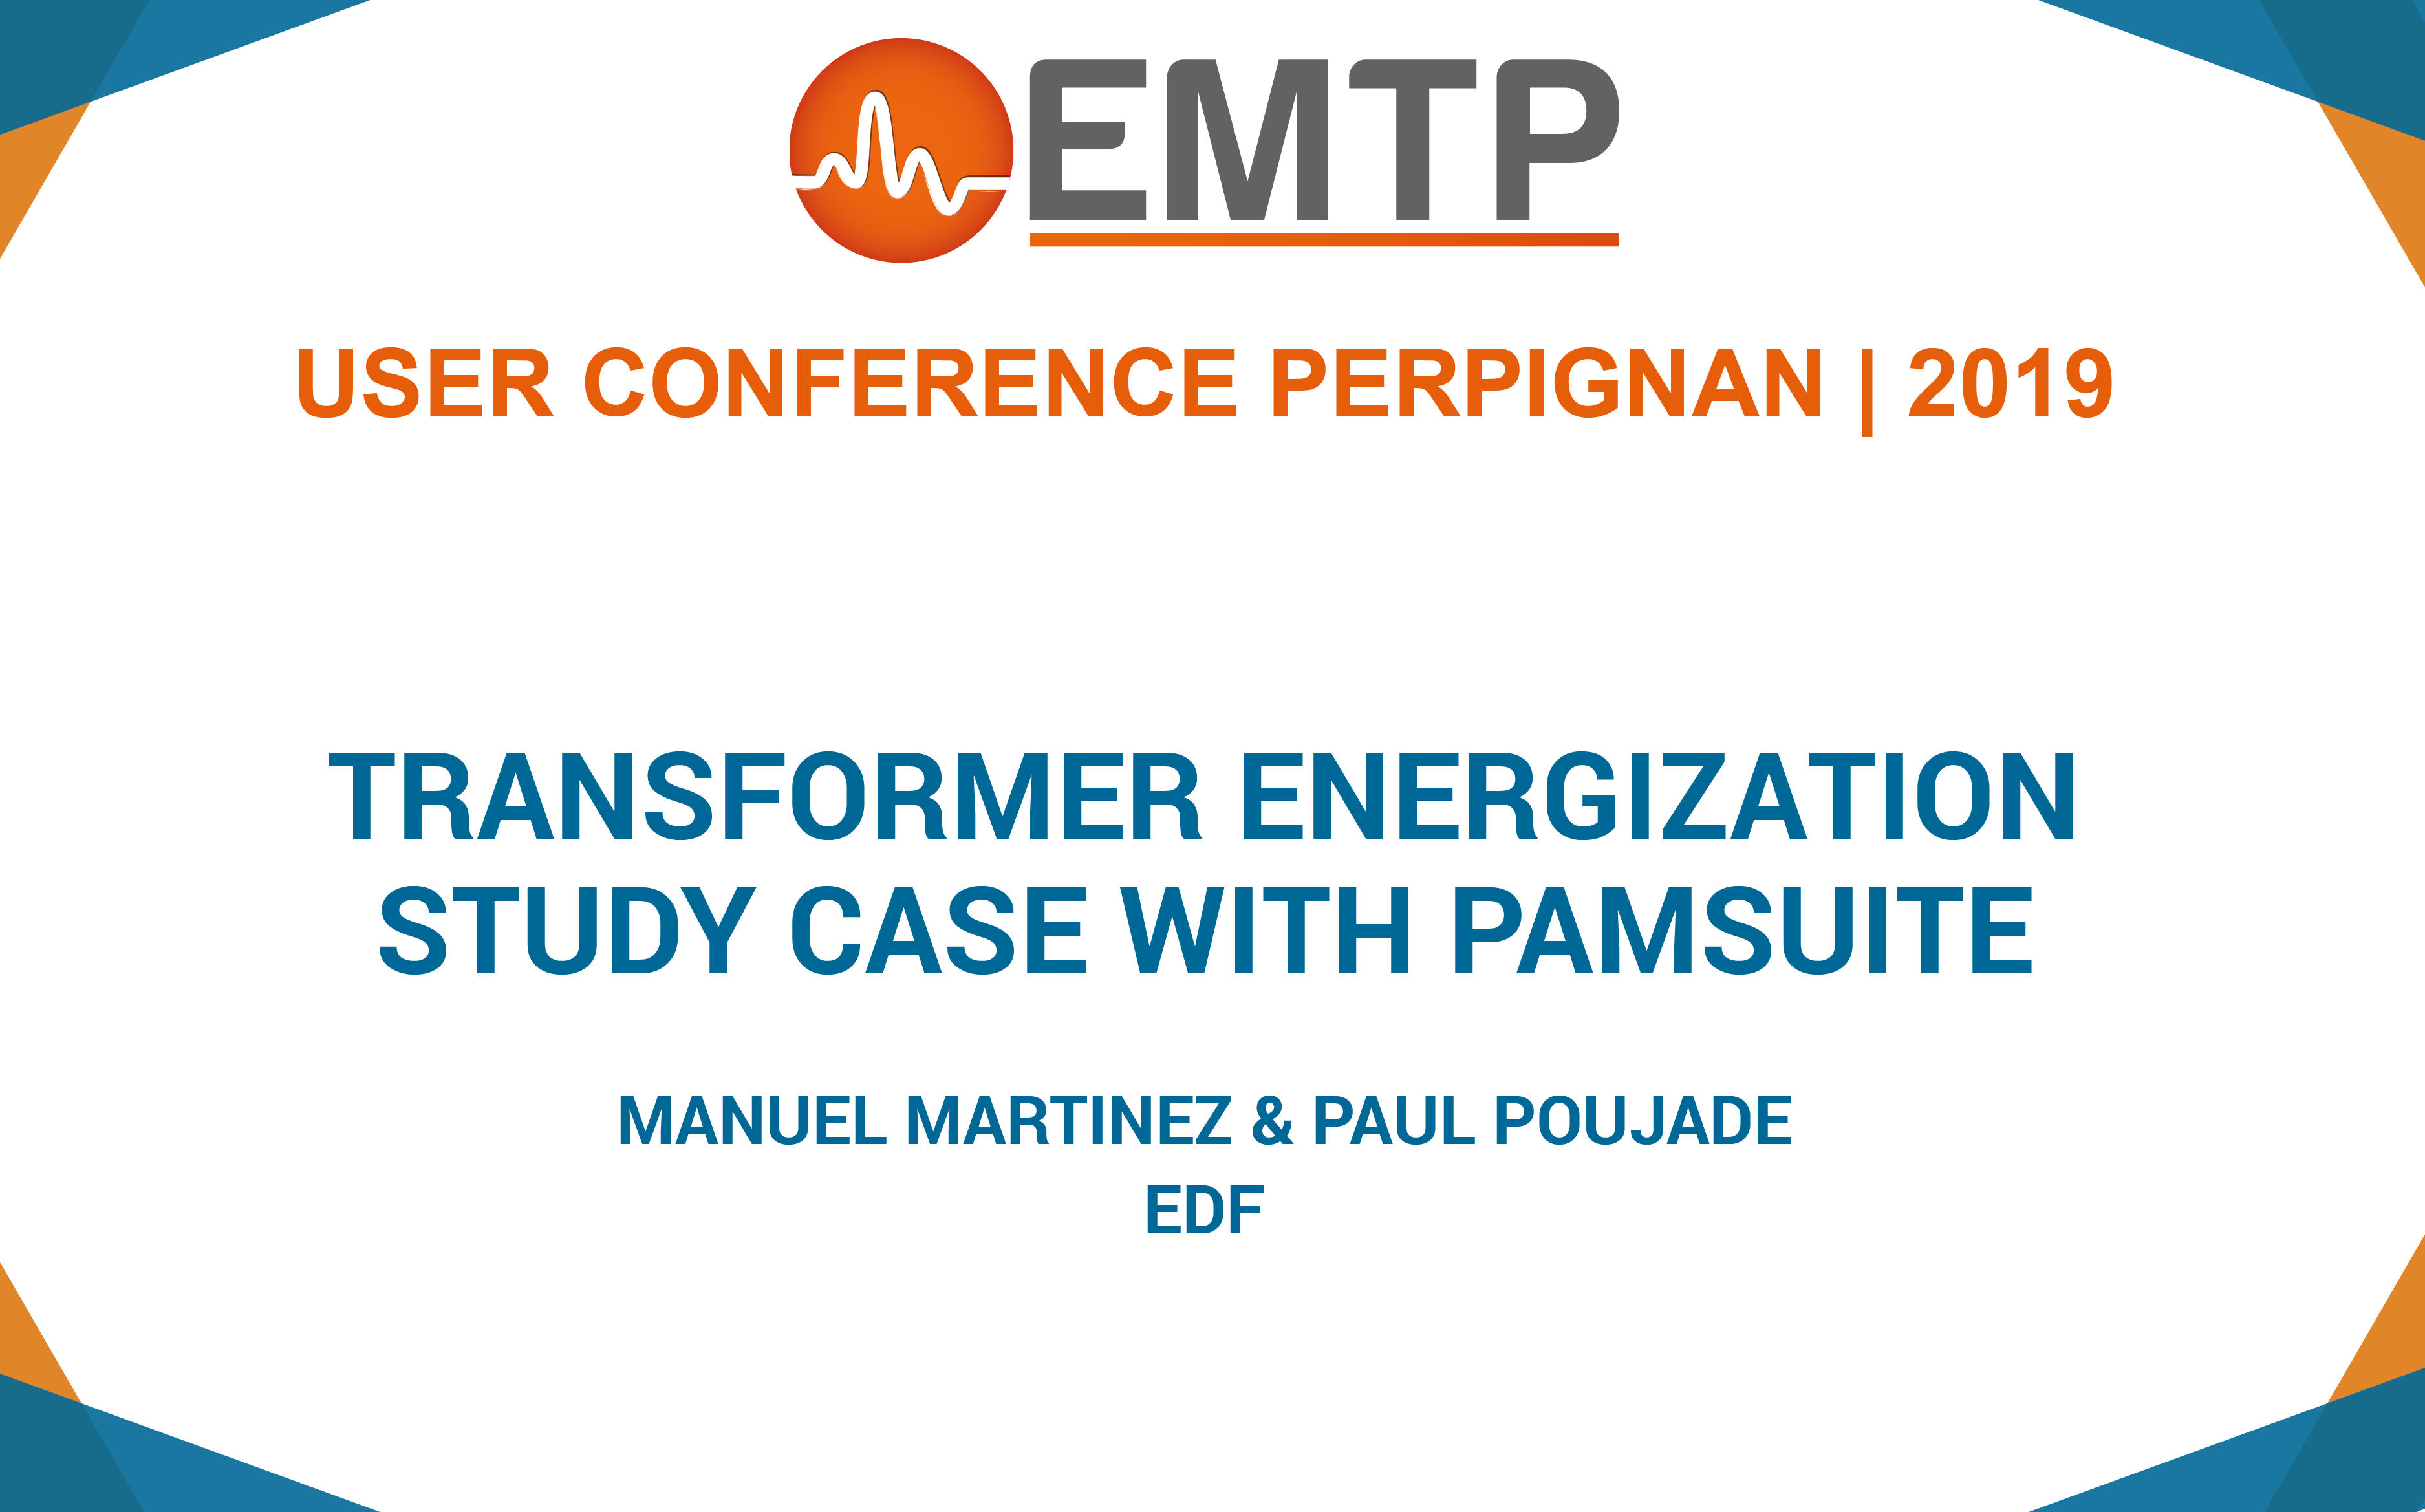 Transformer Energization Study Case with PAMSUITE